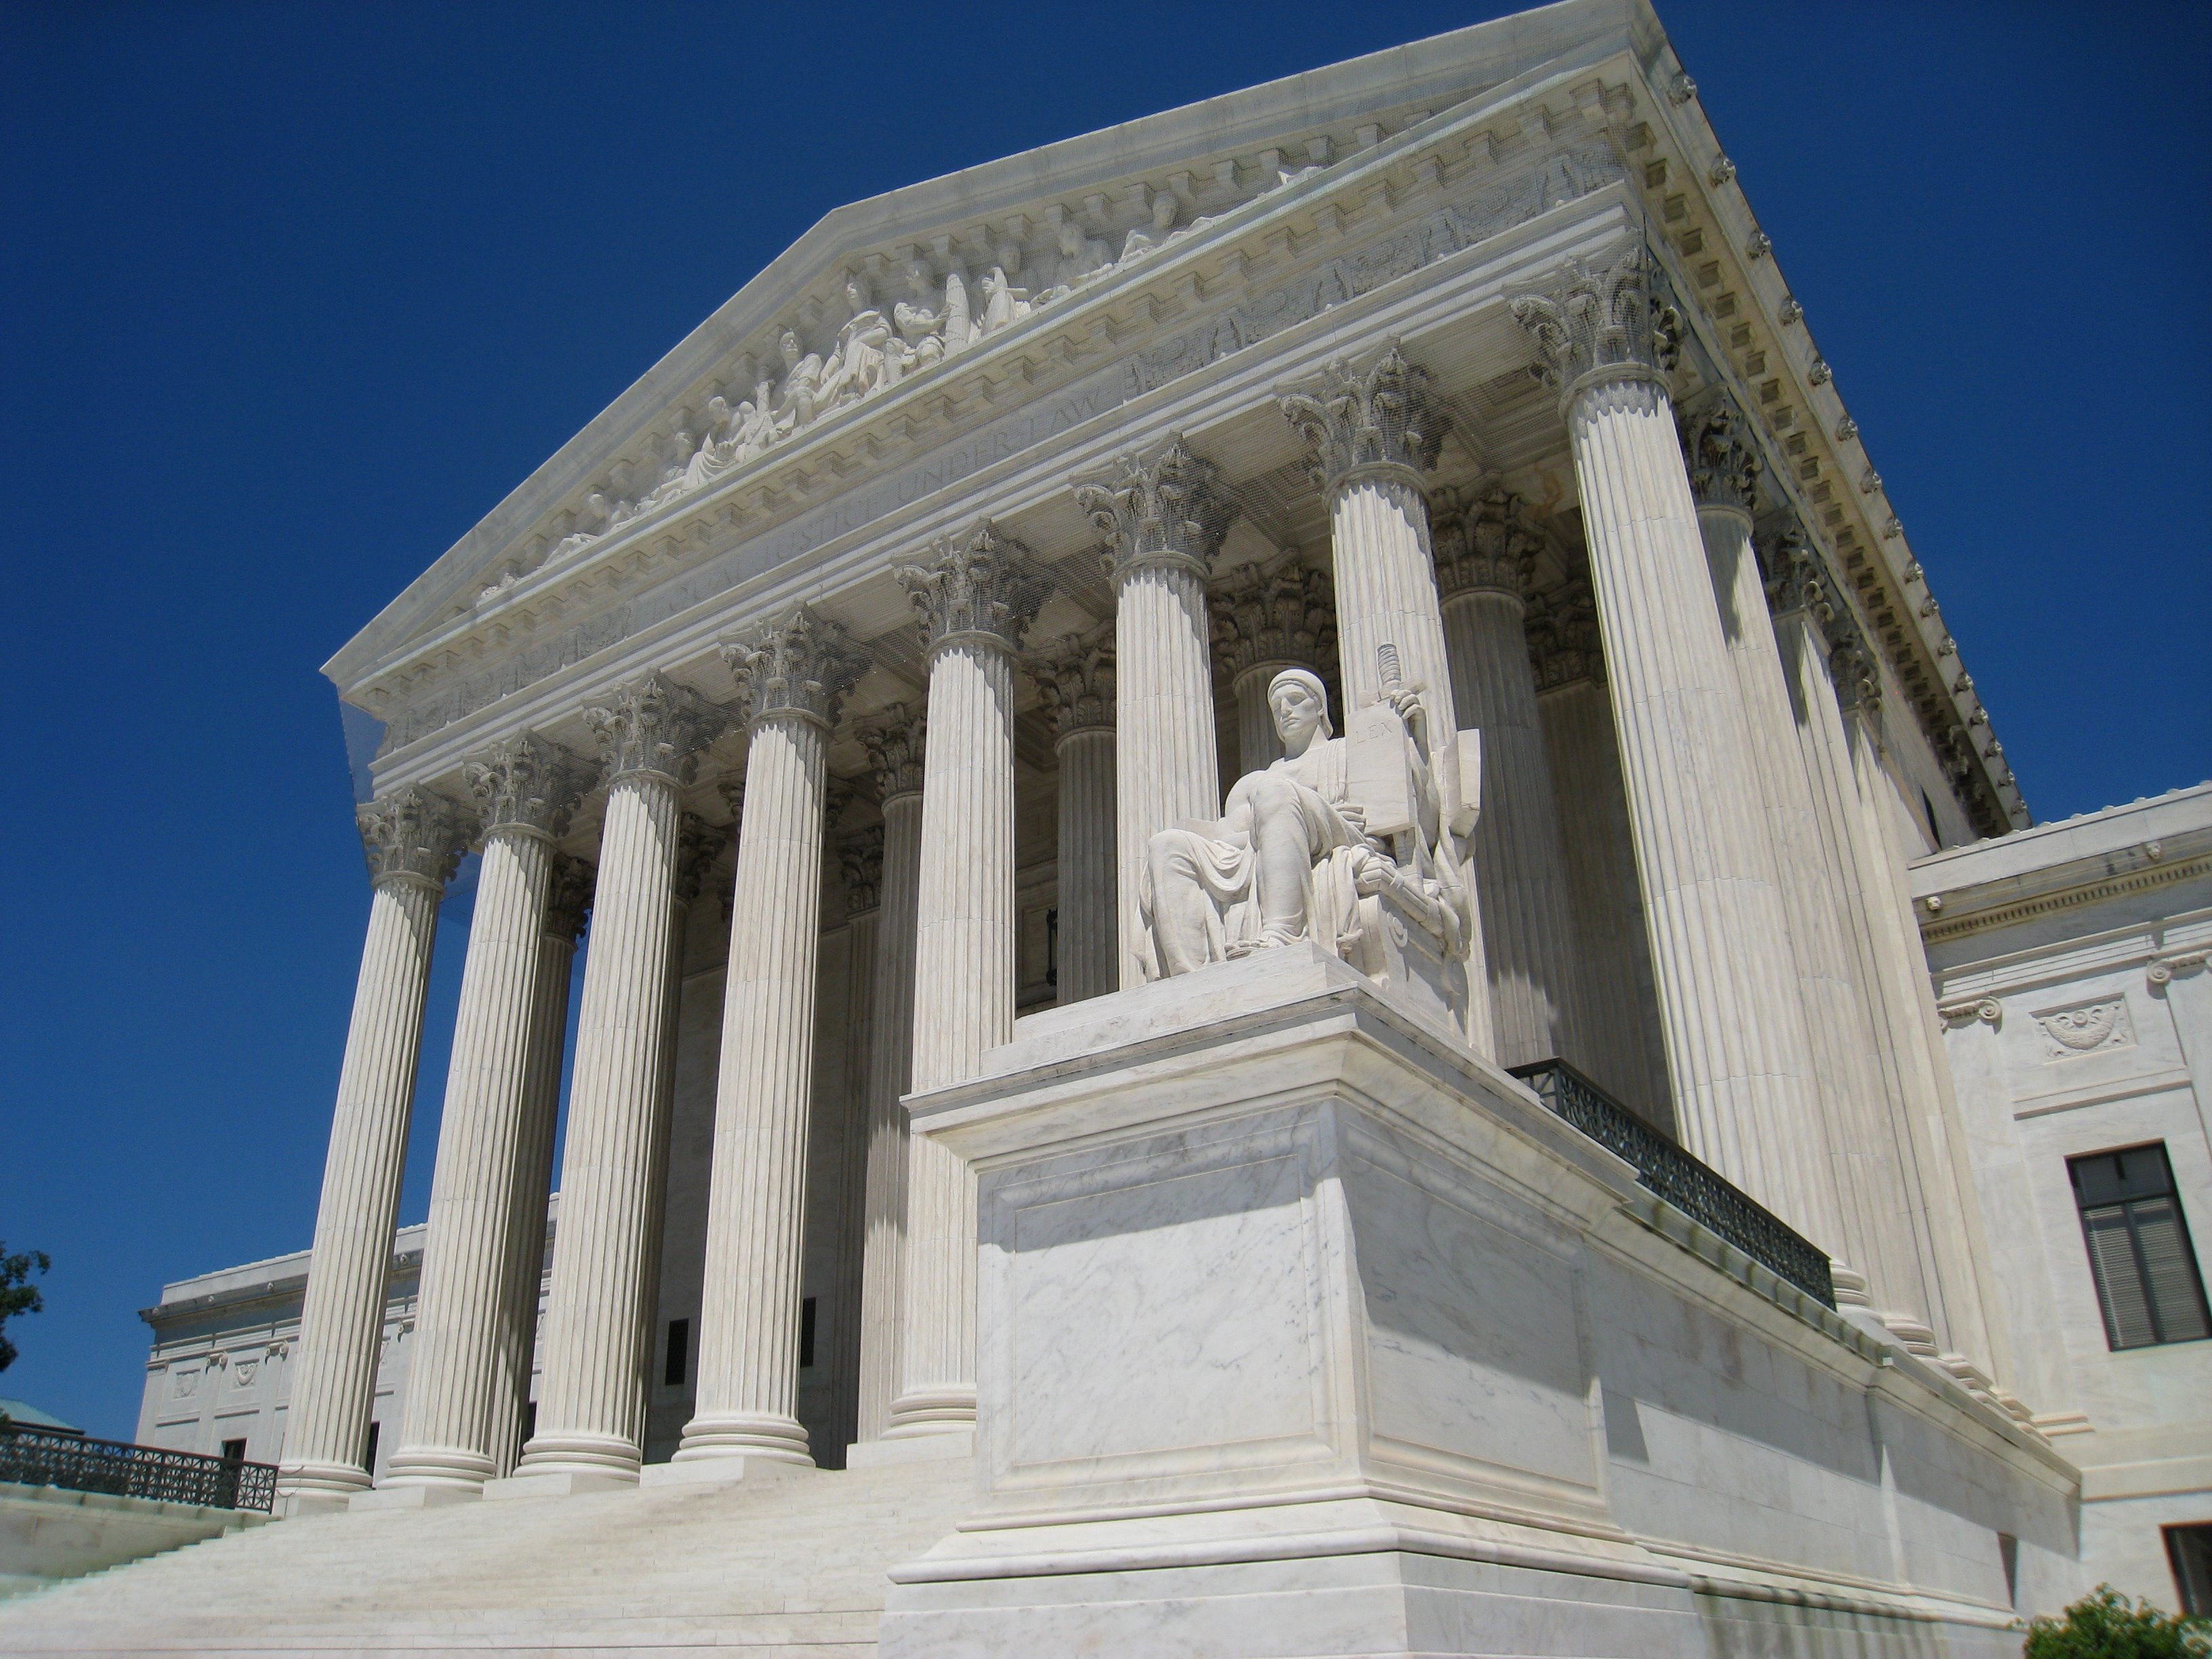 United States Supreme Court Expands Application of Title VII to Protect LGBTQ Employees